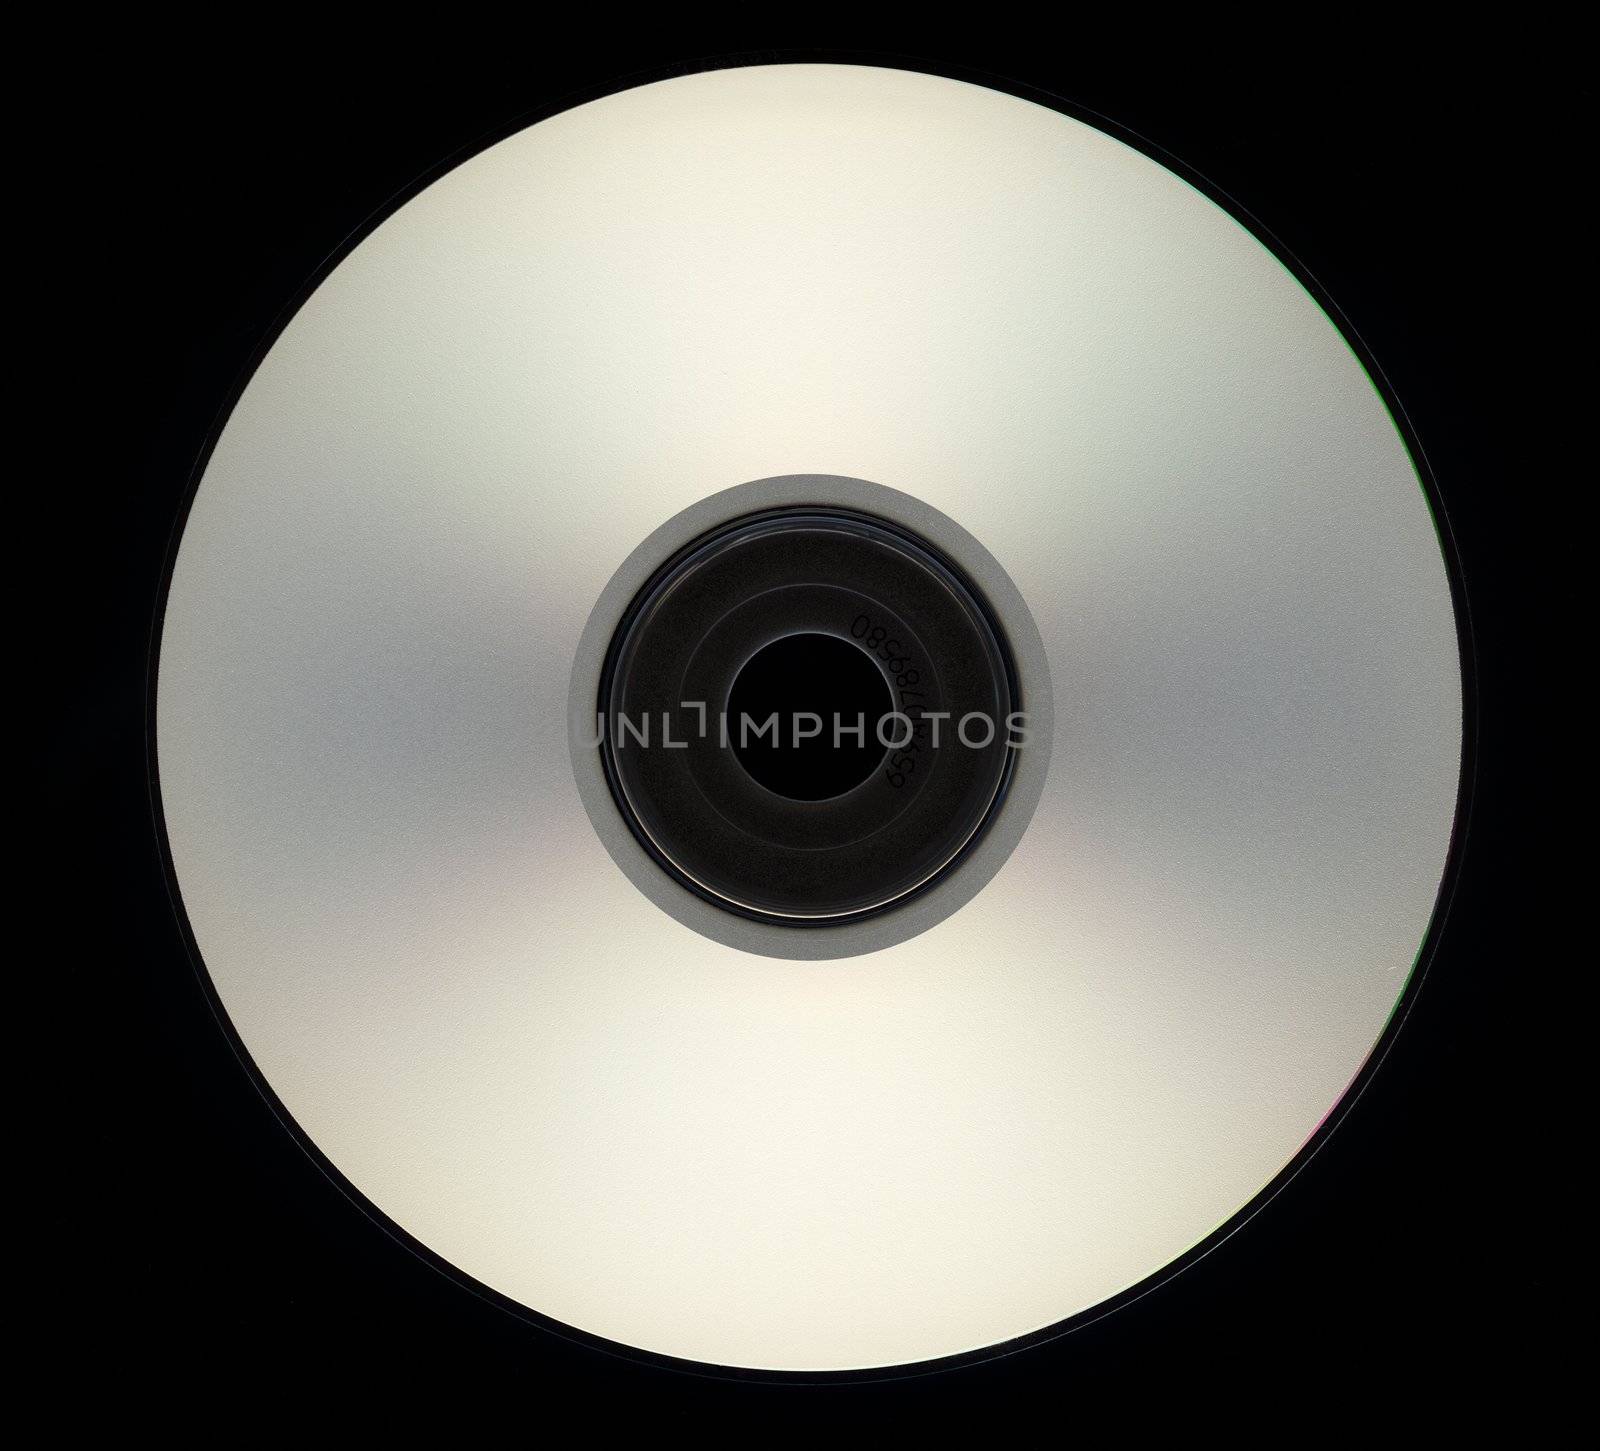 highly detailed image of real cd or dvd blank with white textured surface and serial number on inside circle